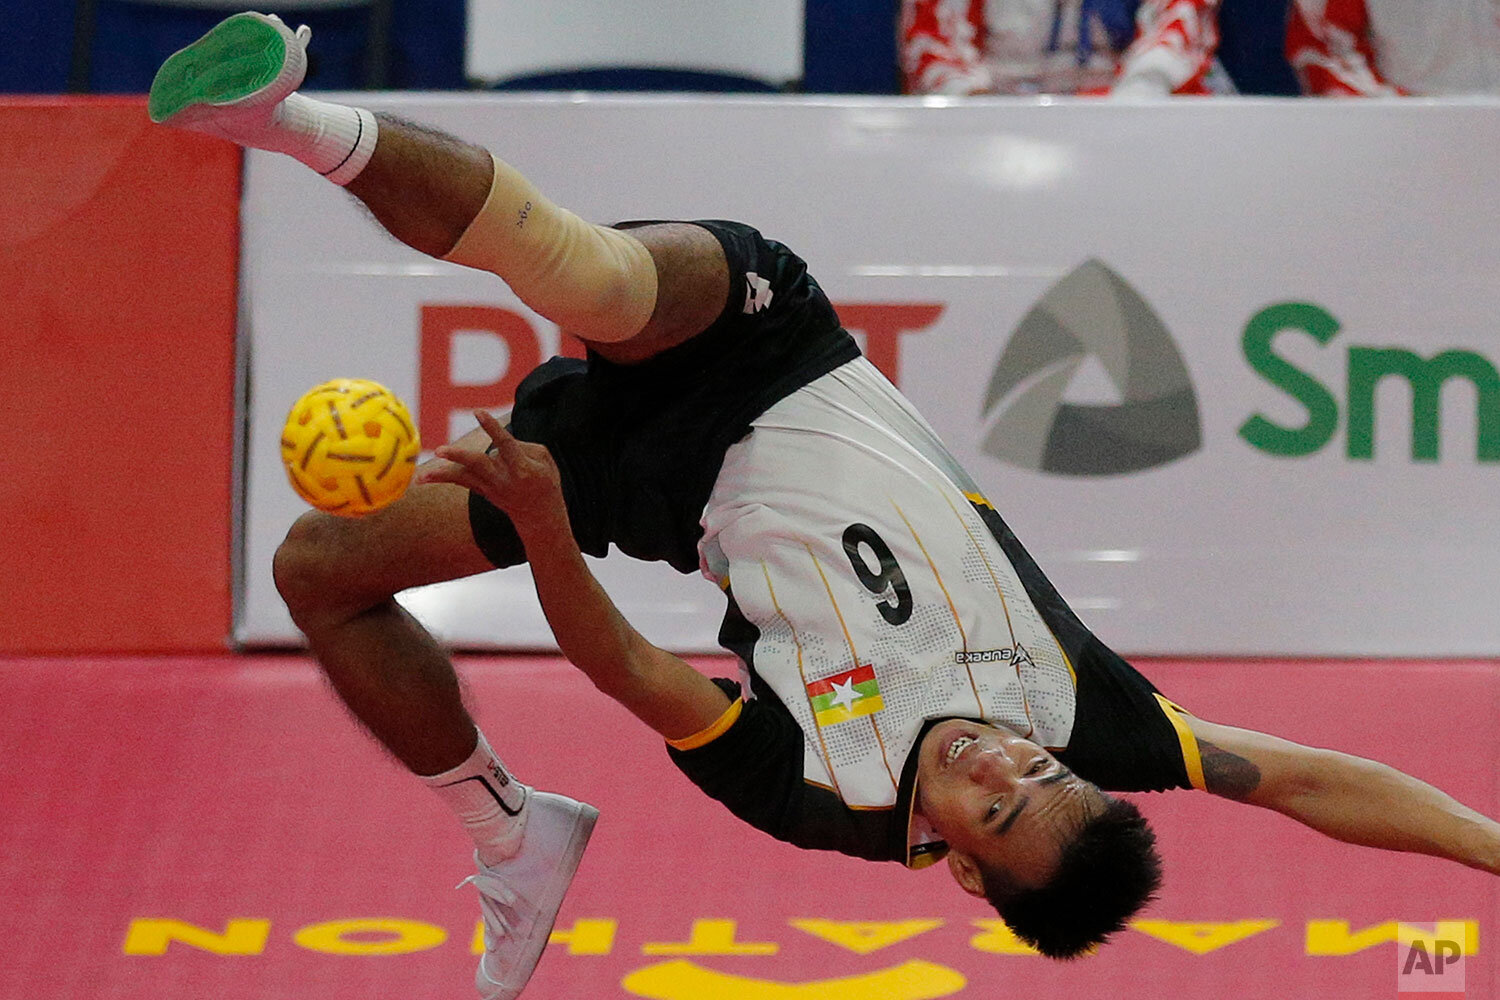  Myanmar's Aung Naing Oo kicks a ball against Indonesia's  Muhammad Hardiansyah and Saiful Rijal during men's team double sepak takraw final match between Indonesia and Myanmar at at the 30th Southeast Asian Games in Subic, Philippines on Thursday, D